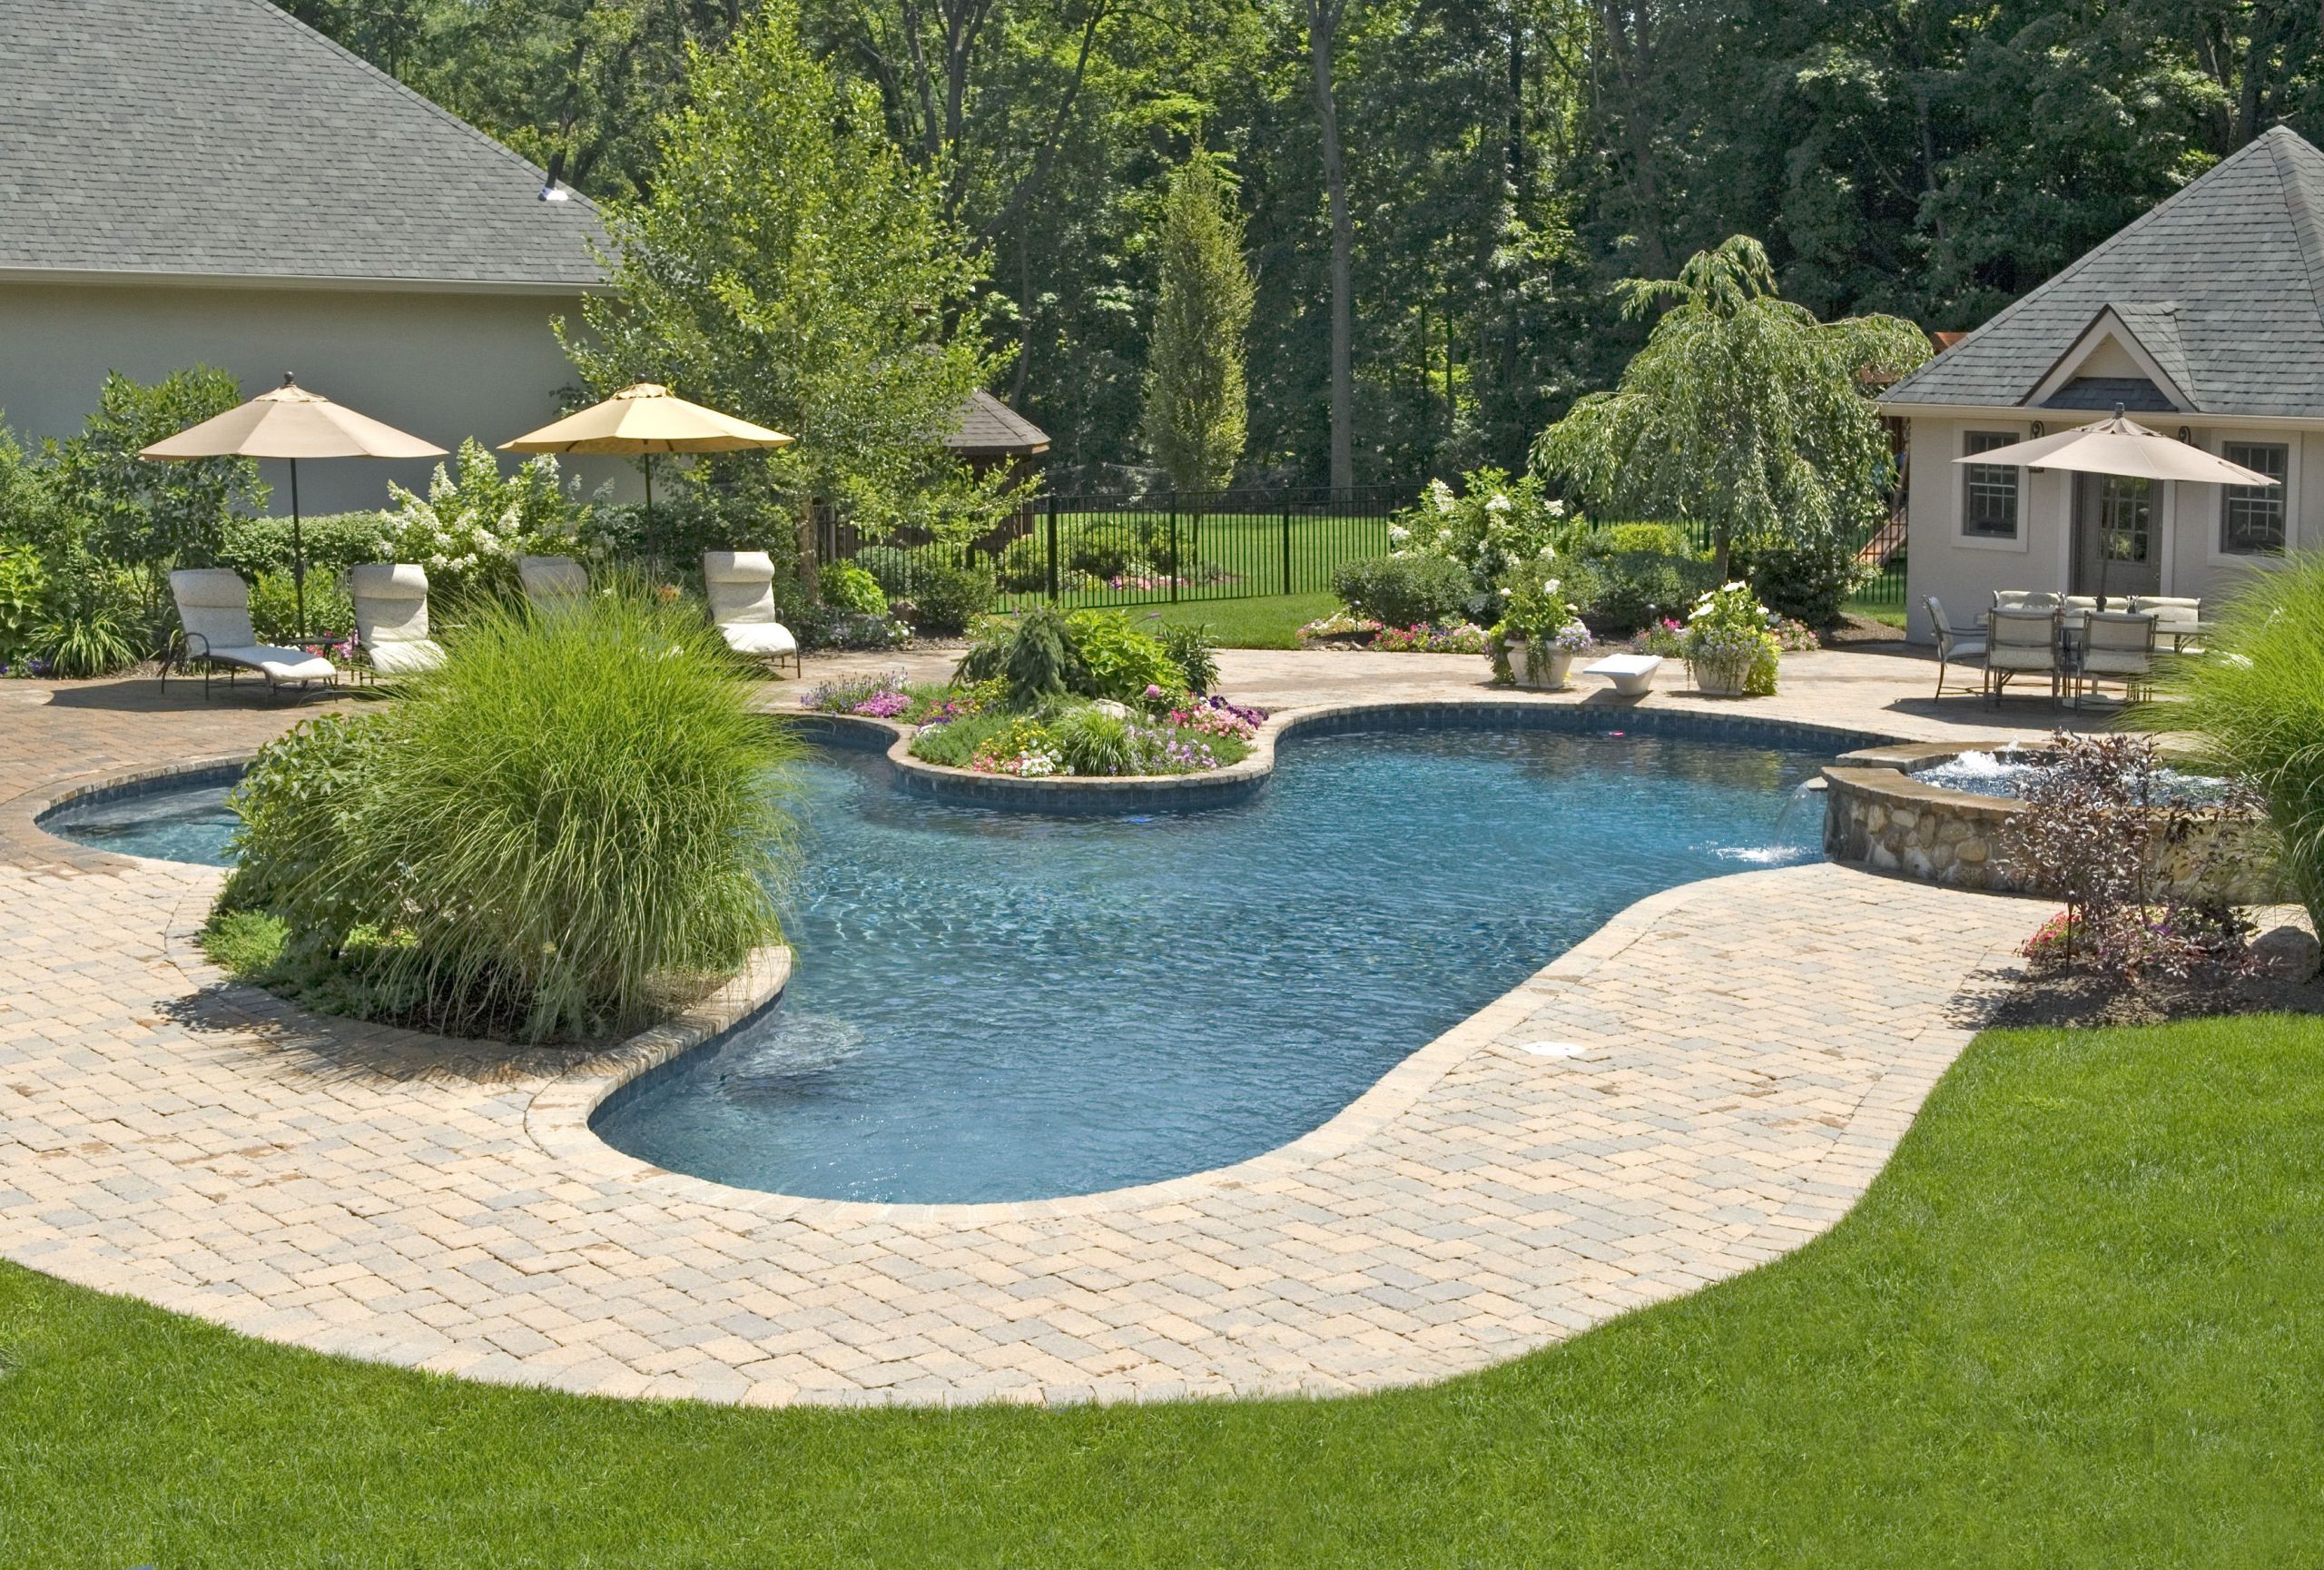 Backyard Pool Landscaping Ideas
 Backyard Pool Ideas for a Better Relaxing Station to Try